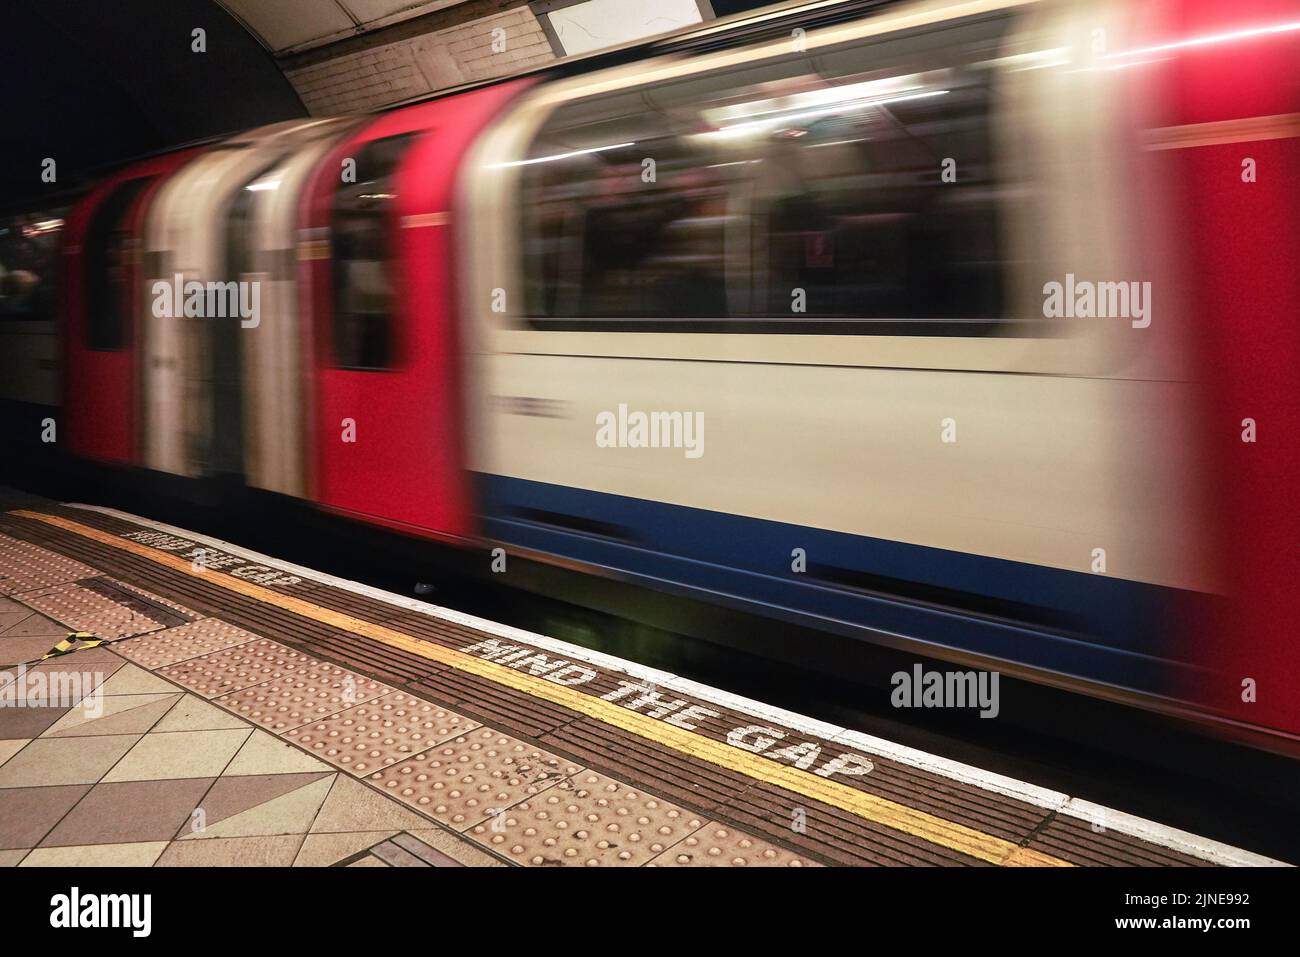 London, United Kingdom - February 01, 2019: MIND THE GAP text on floor of London underground station, blurred train arriving behind white line Stock Photo